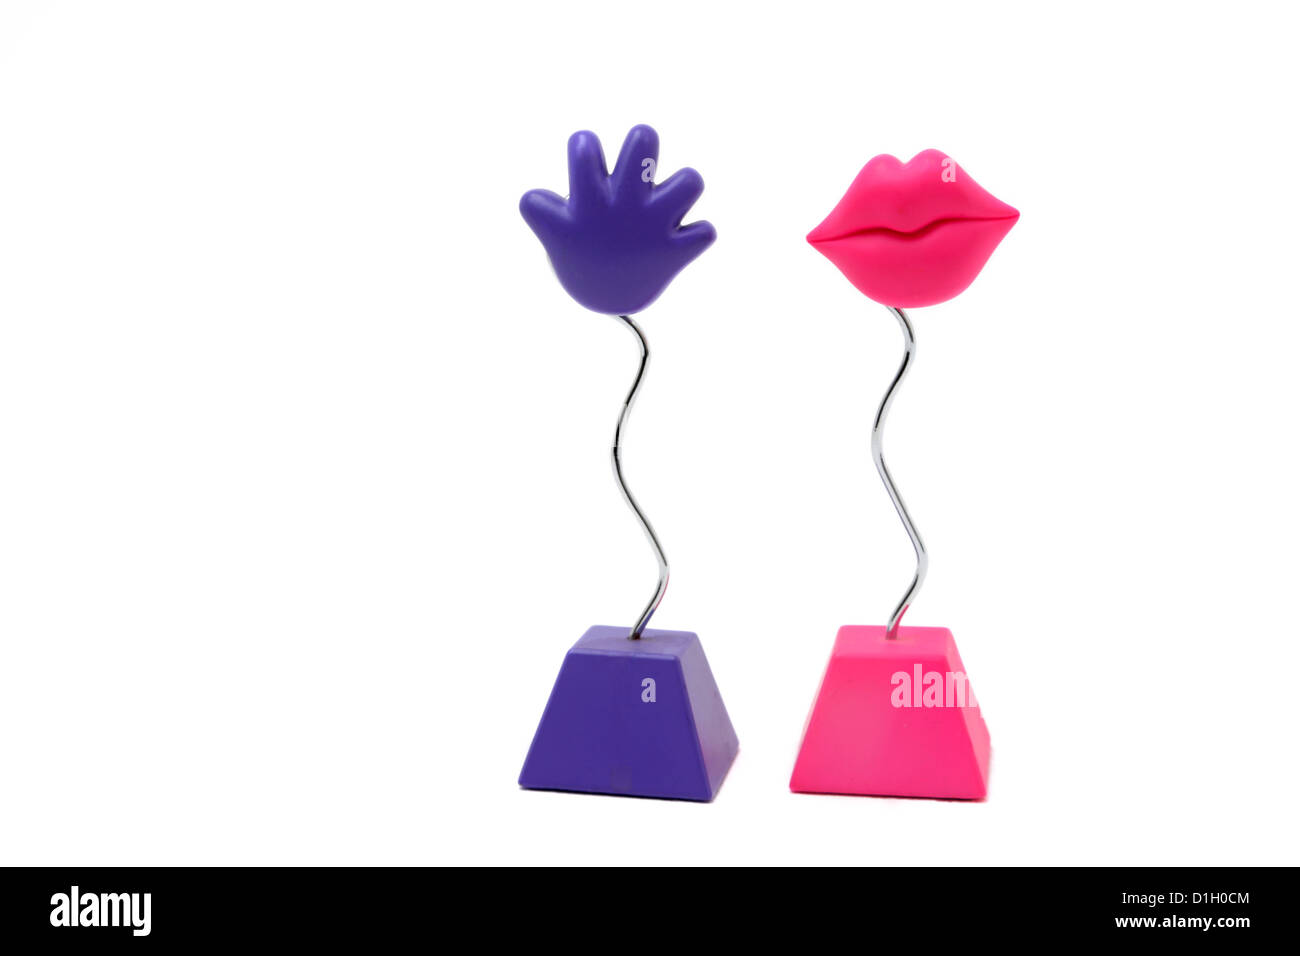 Photograph Holders Purple Hand And Pink Lips Stock Photo